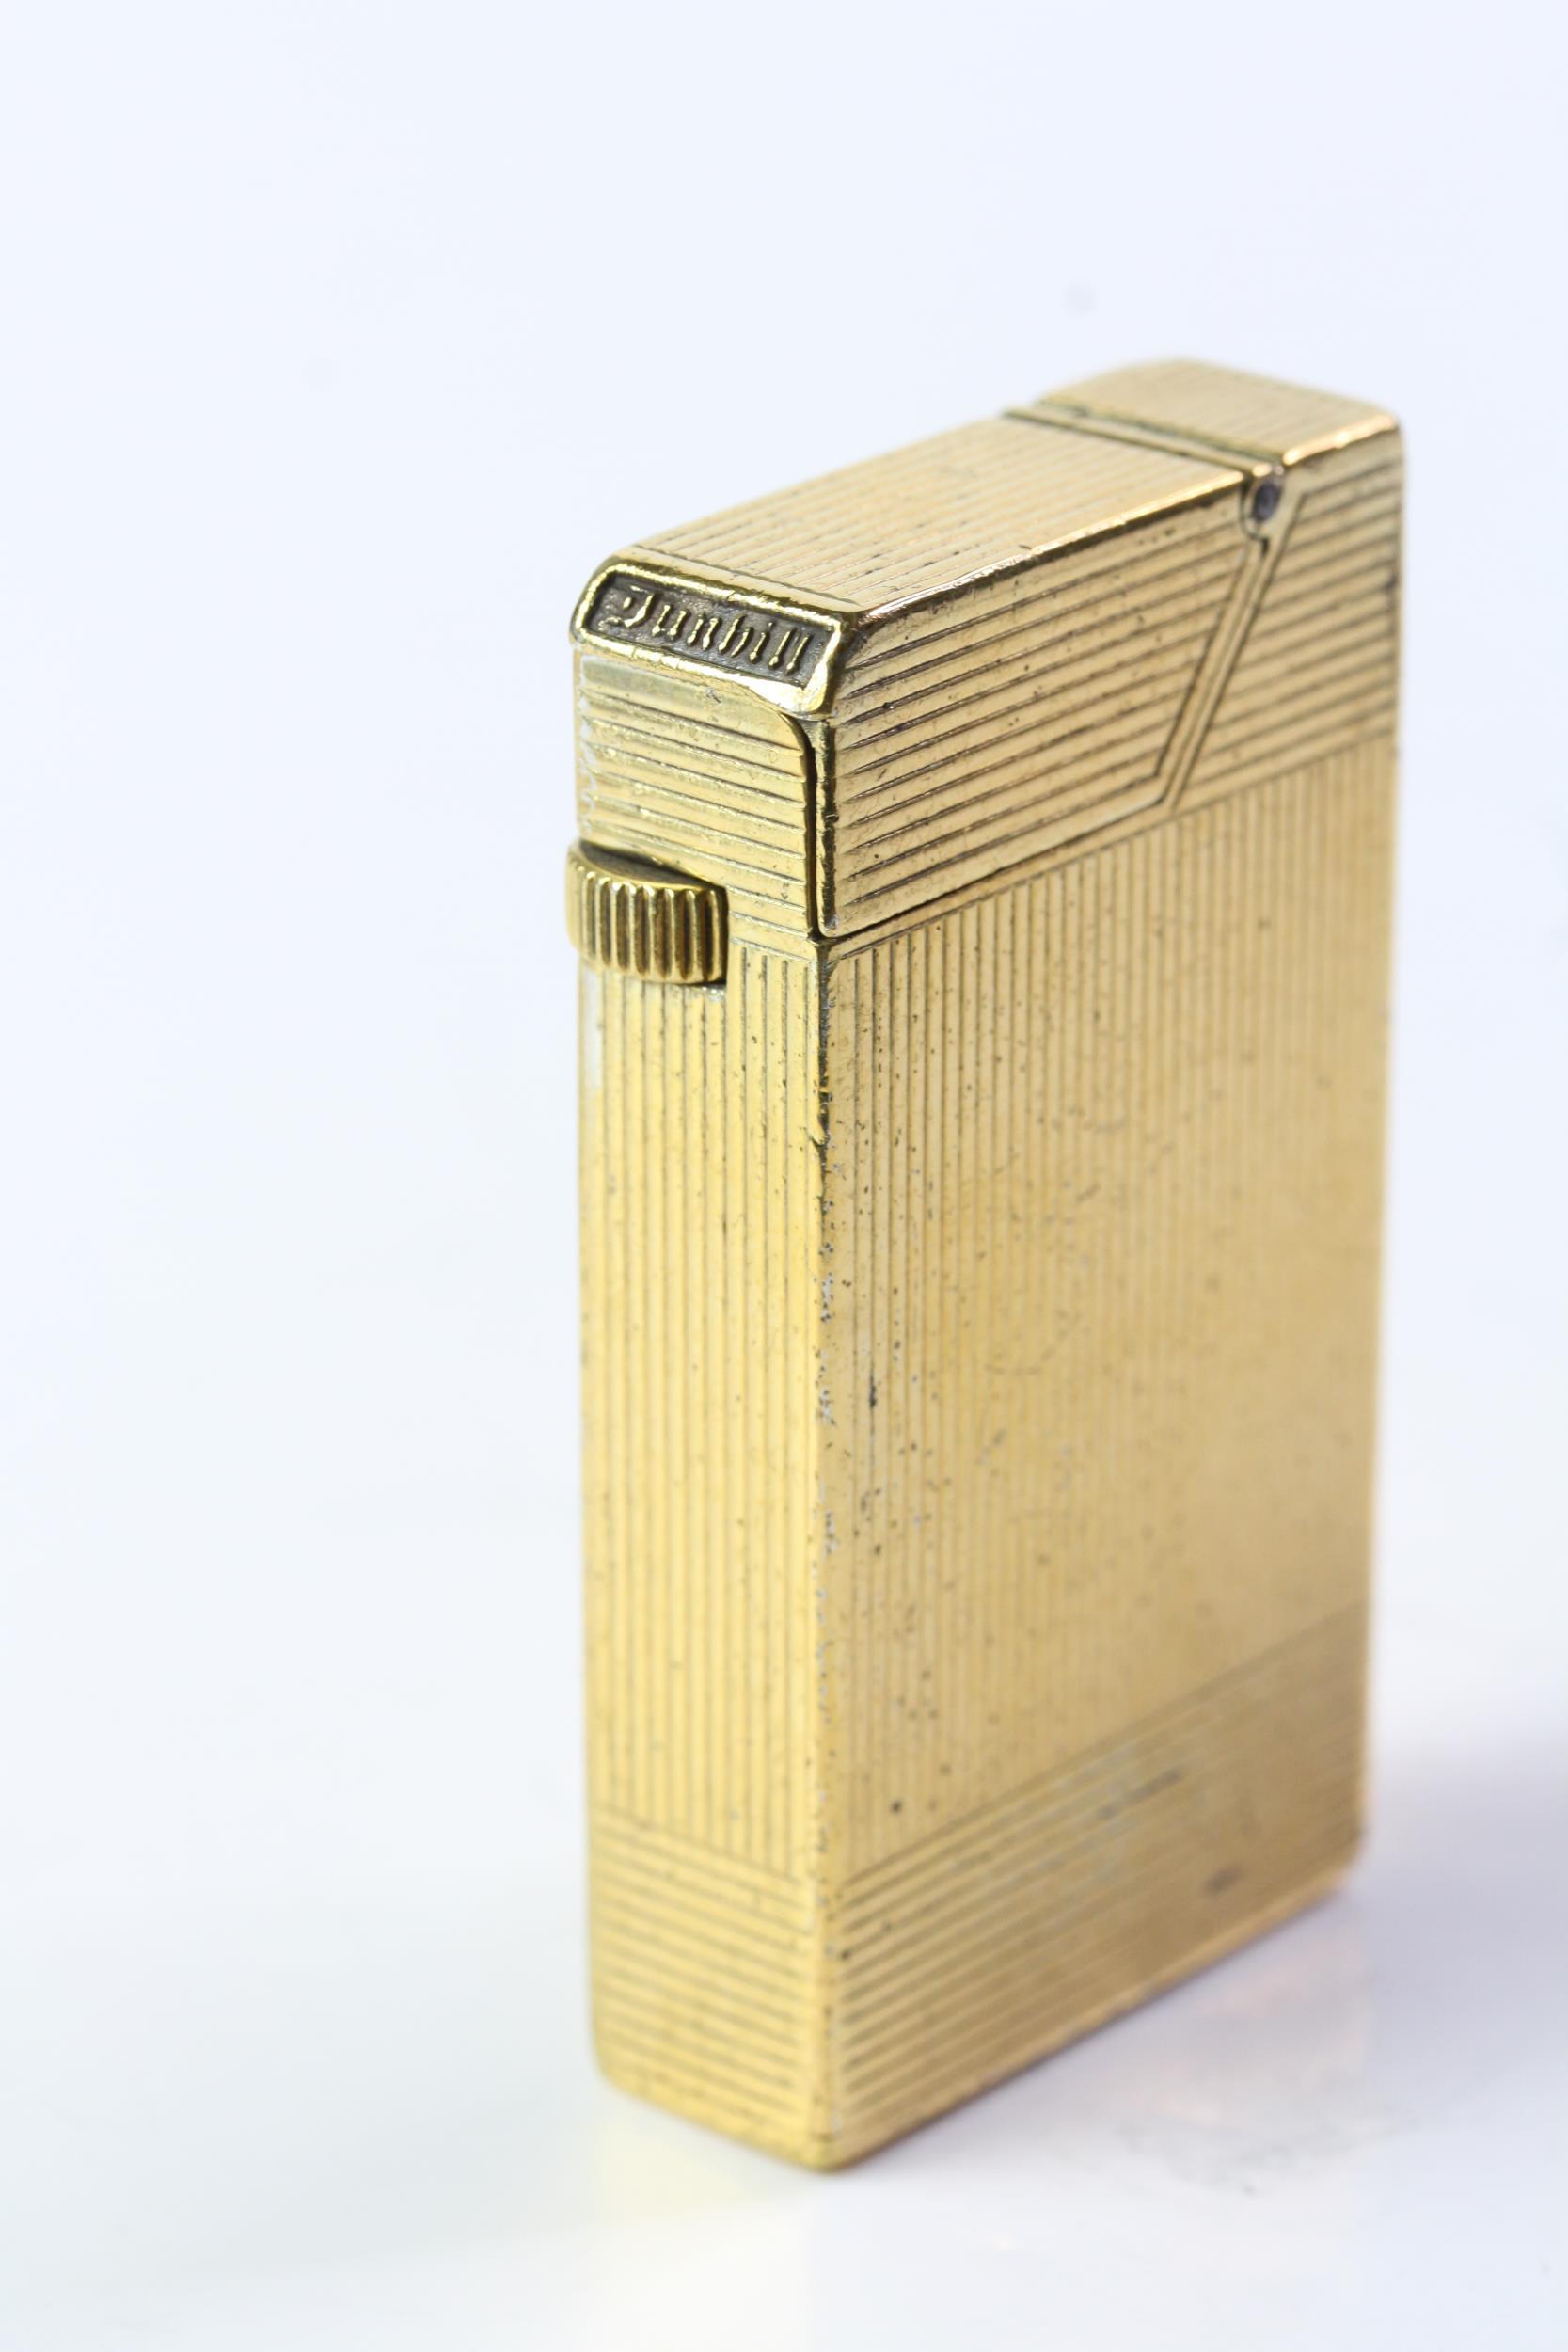 1950S DUNHILL BROAD BOY CIGARETTE LIGHTER, gold plated pin stripe case, signed with Patent number - Image 2 of 4